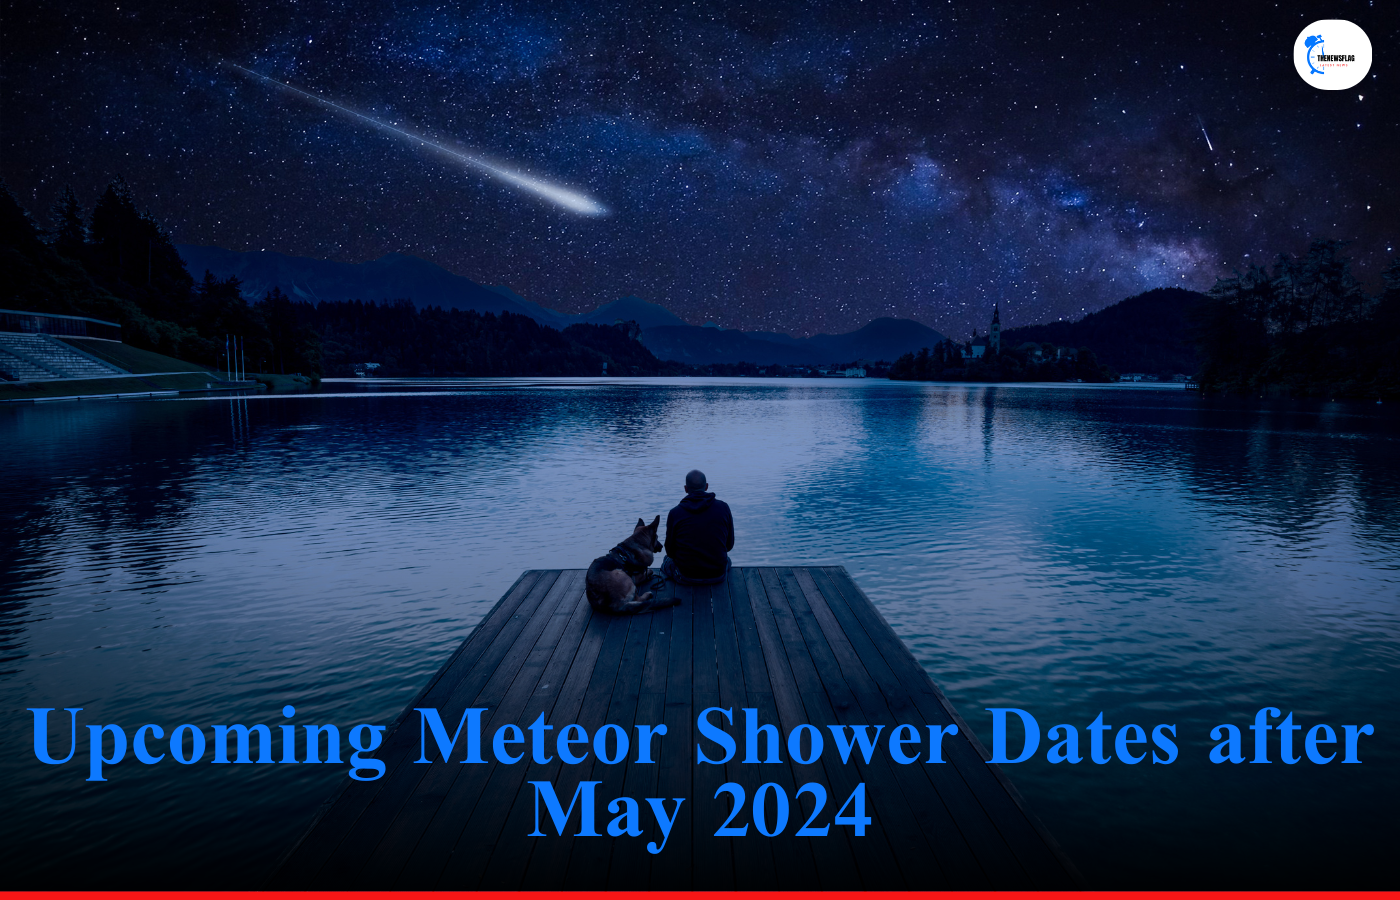 Upcoming Meteor Shower Dates after May 2024